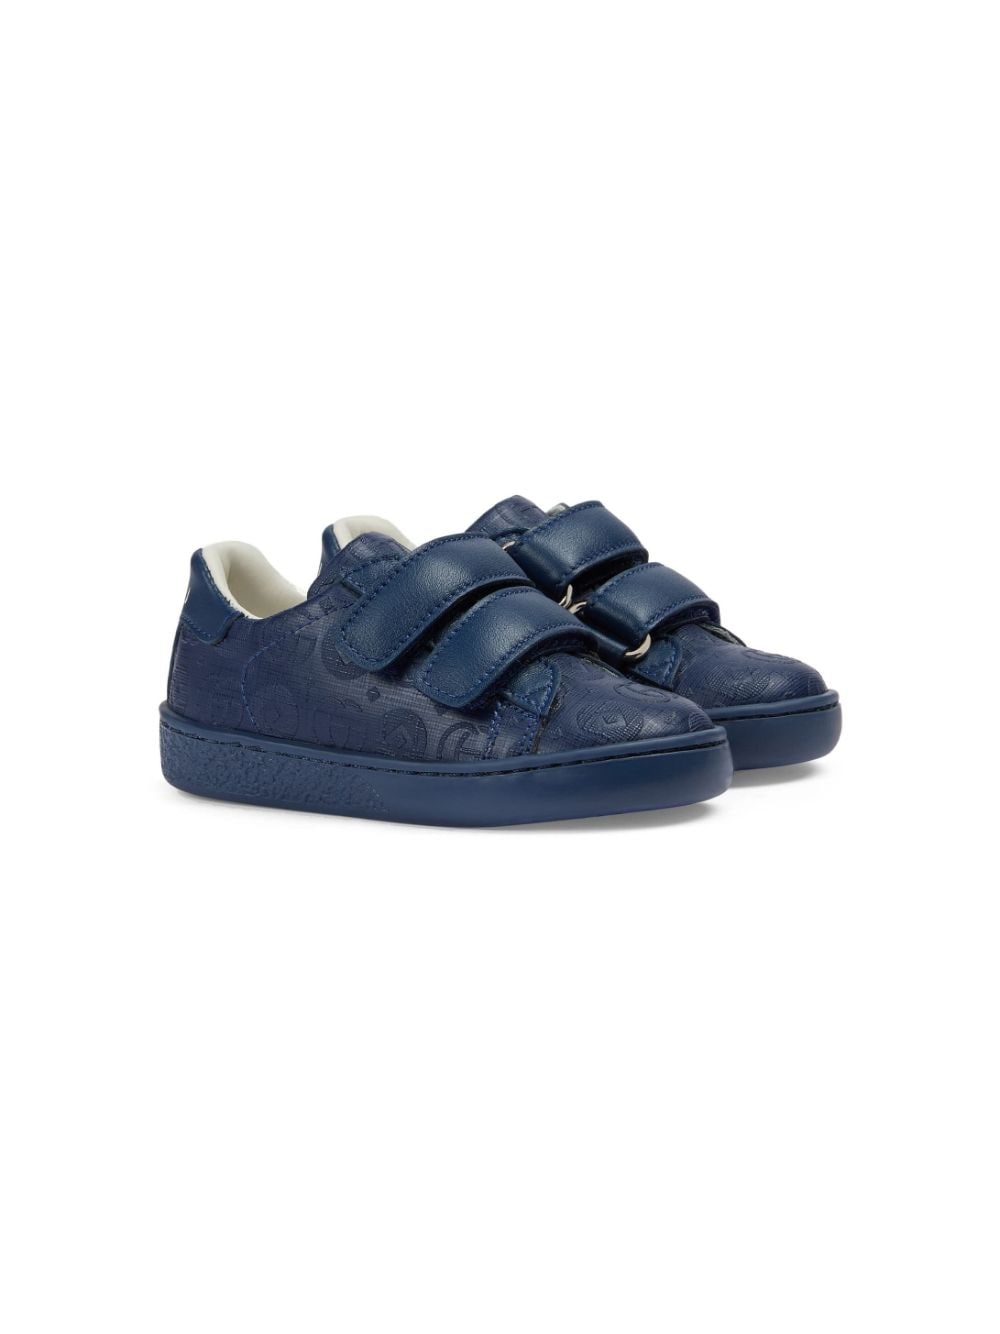 Gucci Kids Ace touch-strap sneakers - Blue